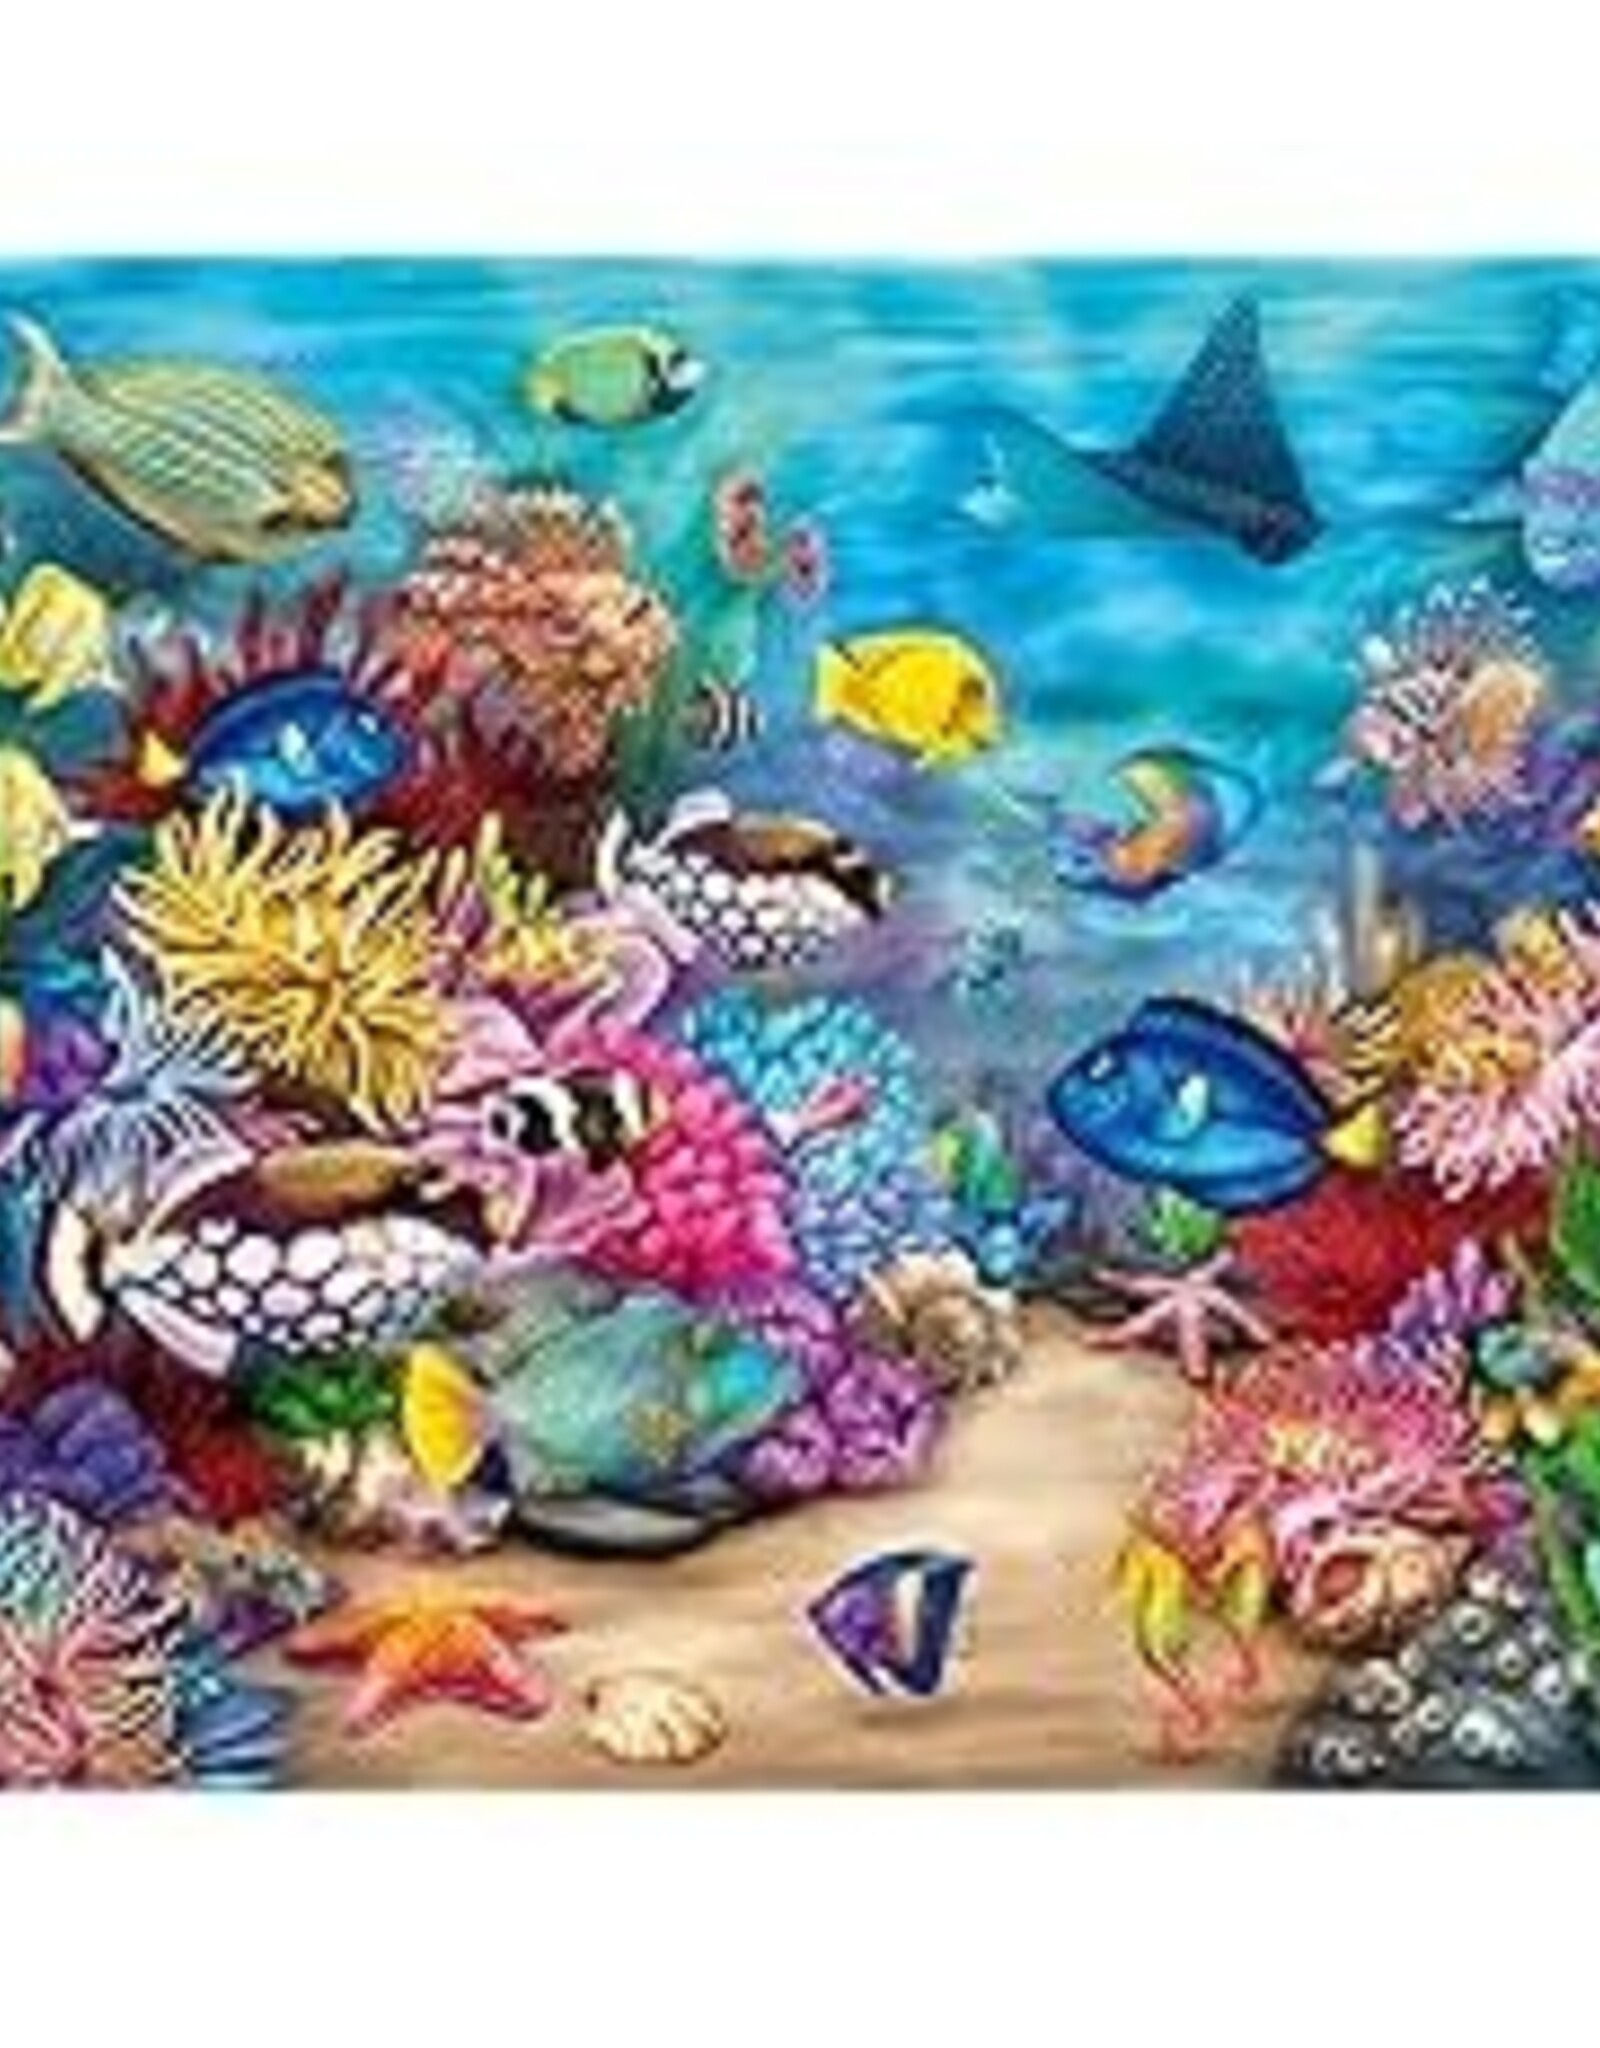 Ravensburger 750pc Puzzle - Tropical Reef Life